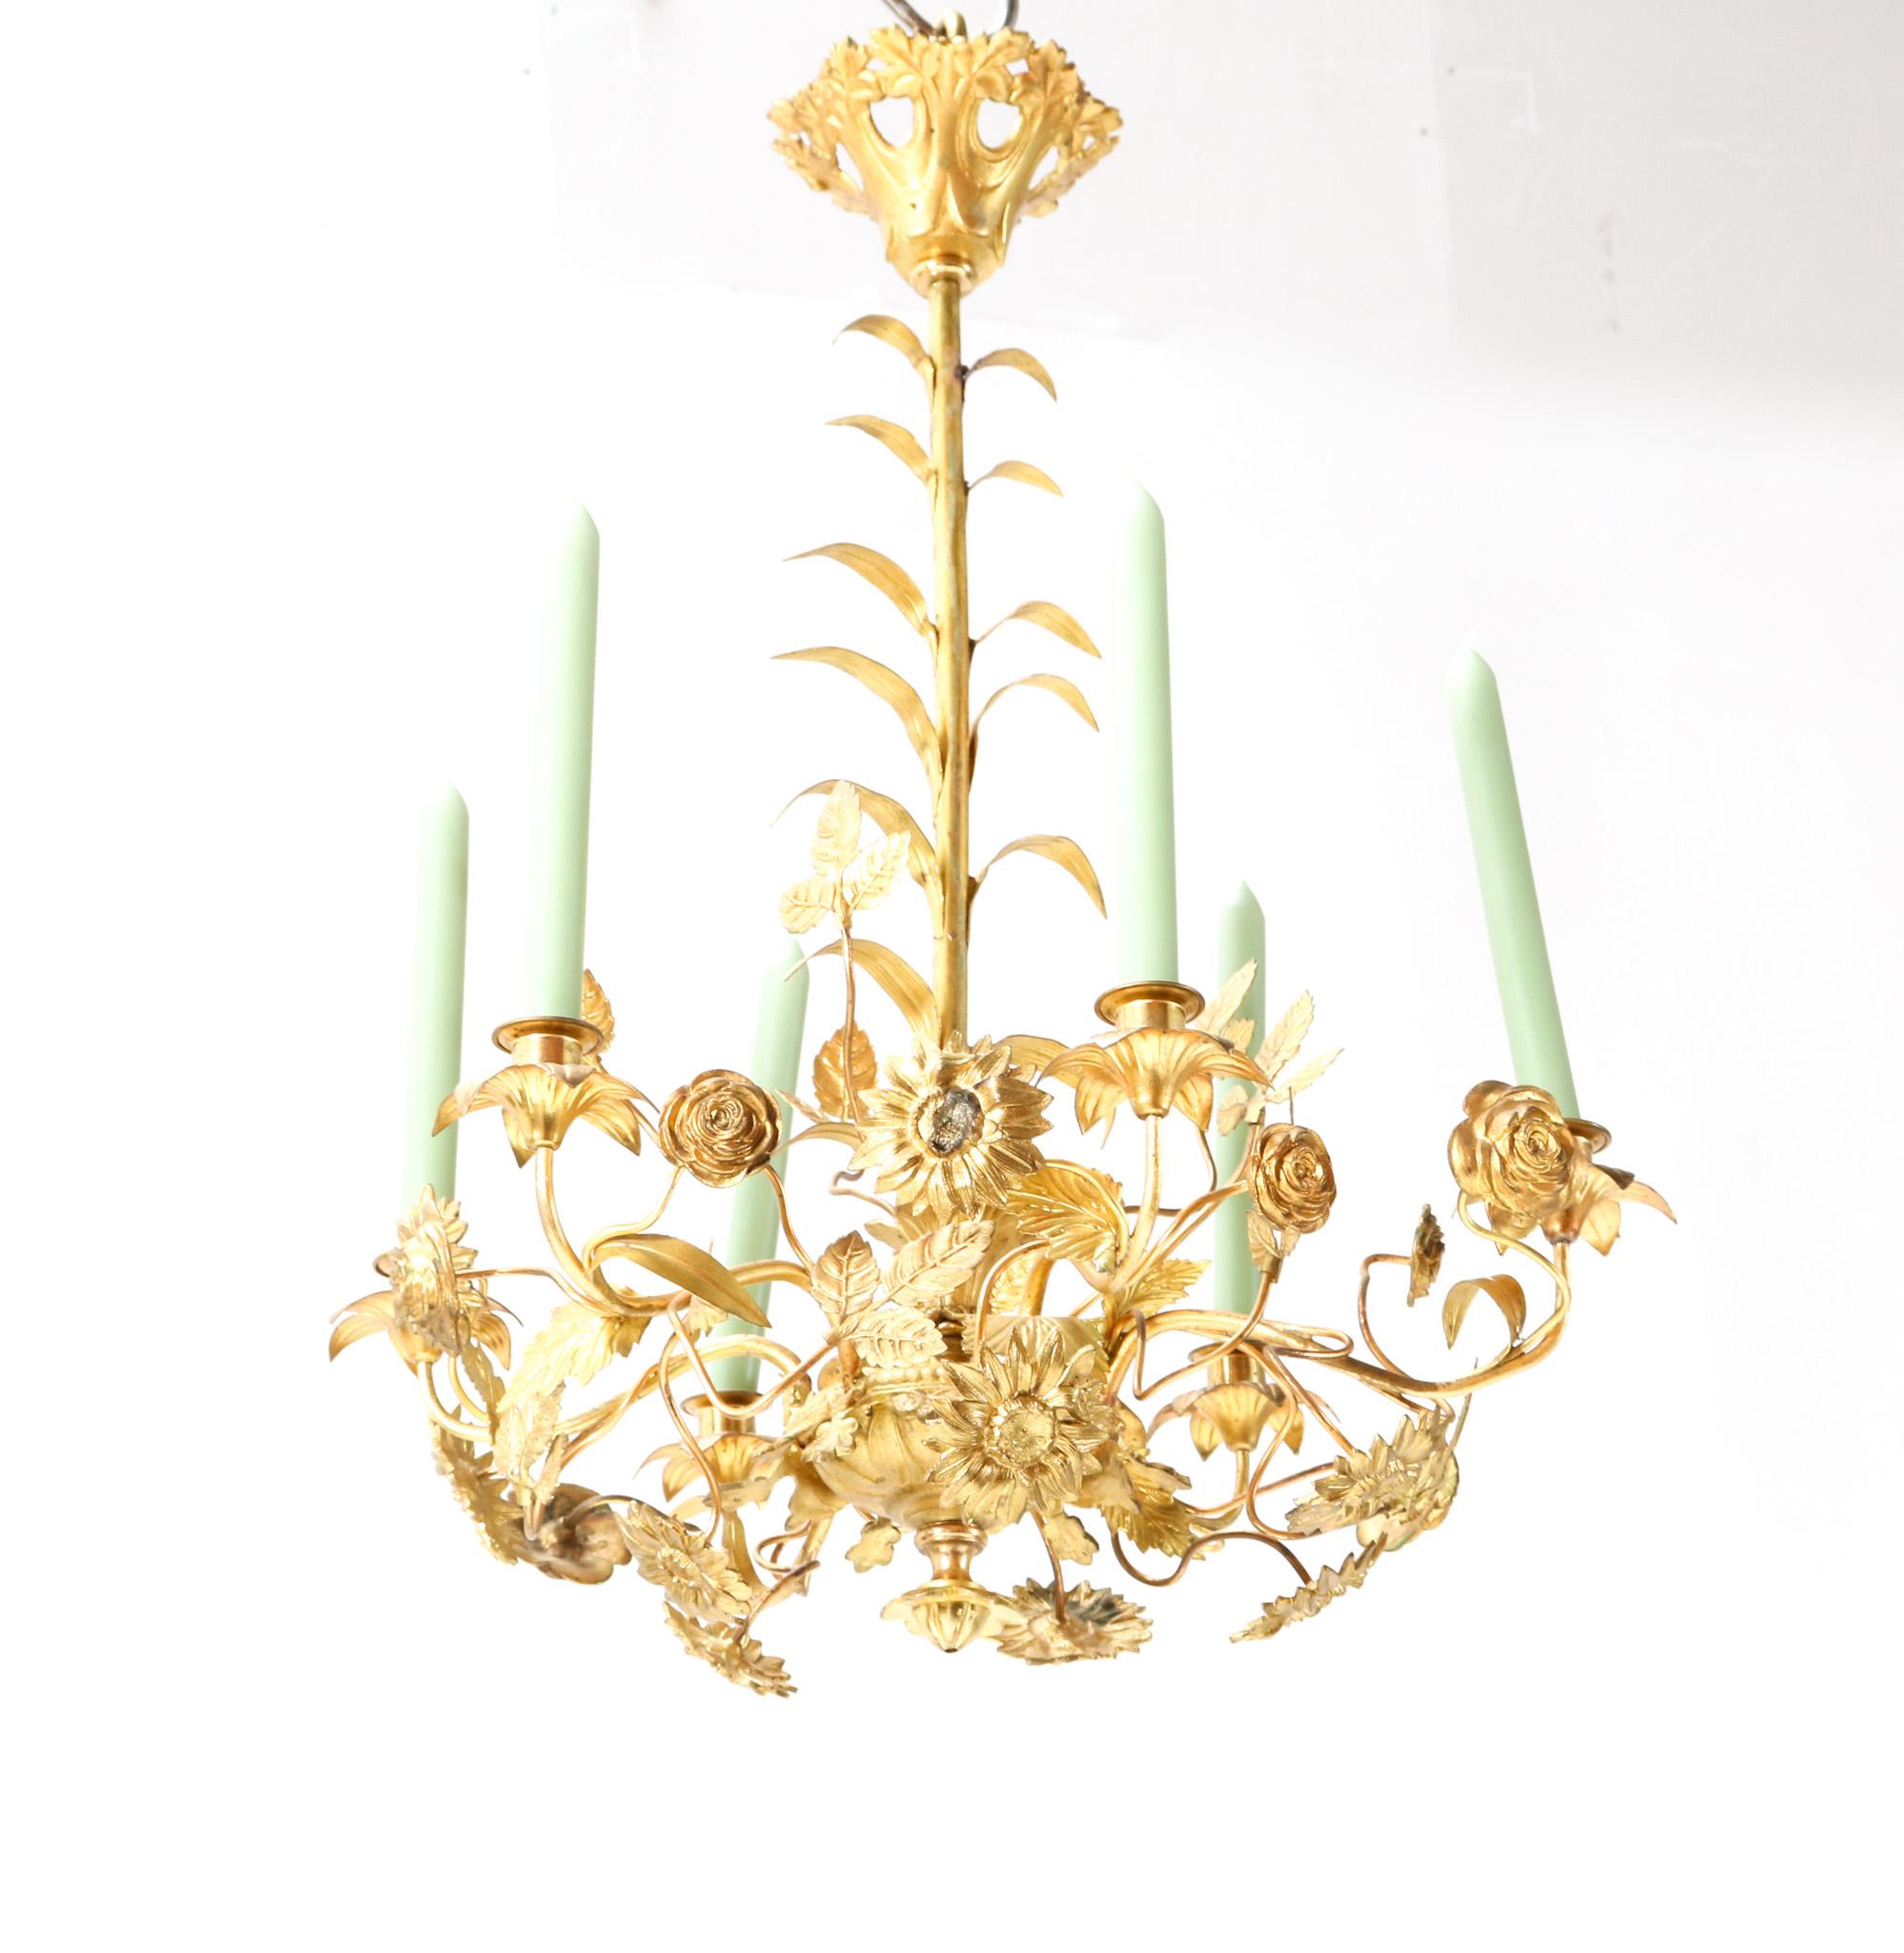 Stunning and rare Art Nouveau chandelier.
Striking French design from the 1900s.
Original gilt brass frame with original floral decorative elements.
Five original candle holders for candle light.
This wonderful Art Nouveau chandelier is in very good